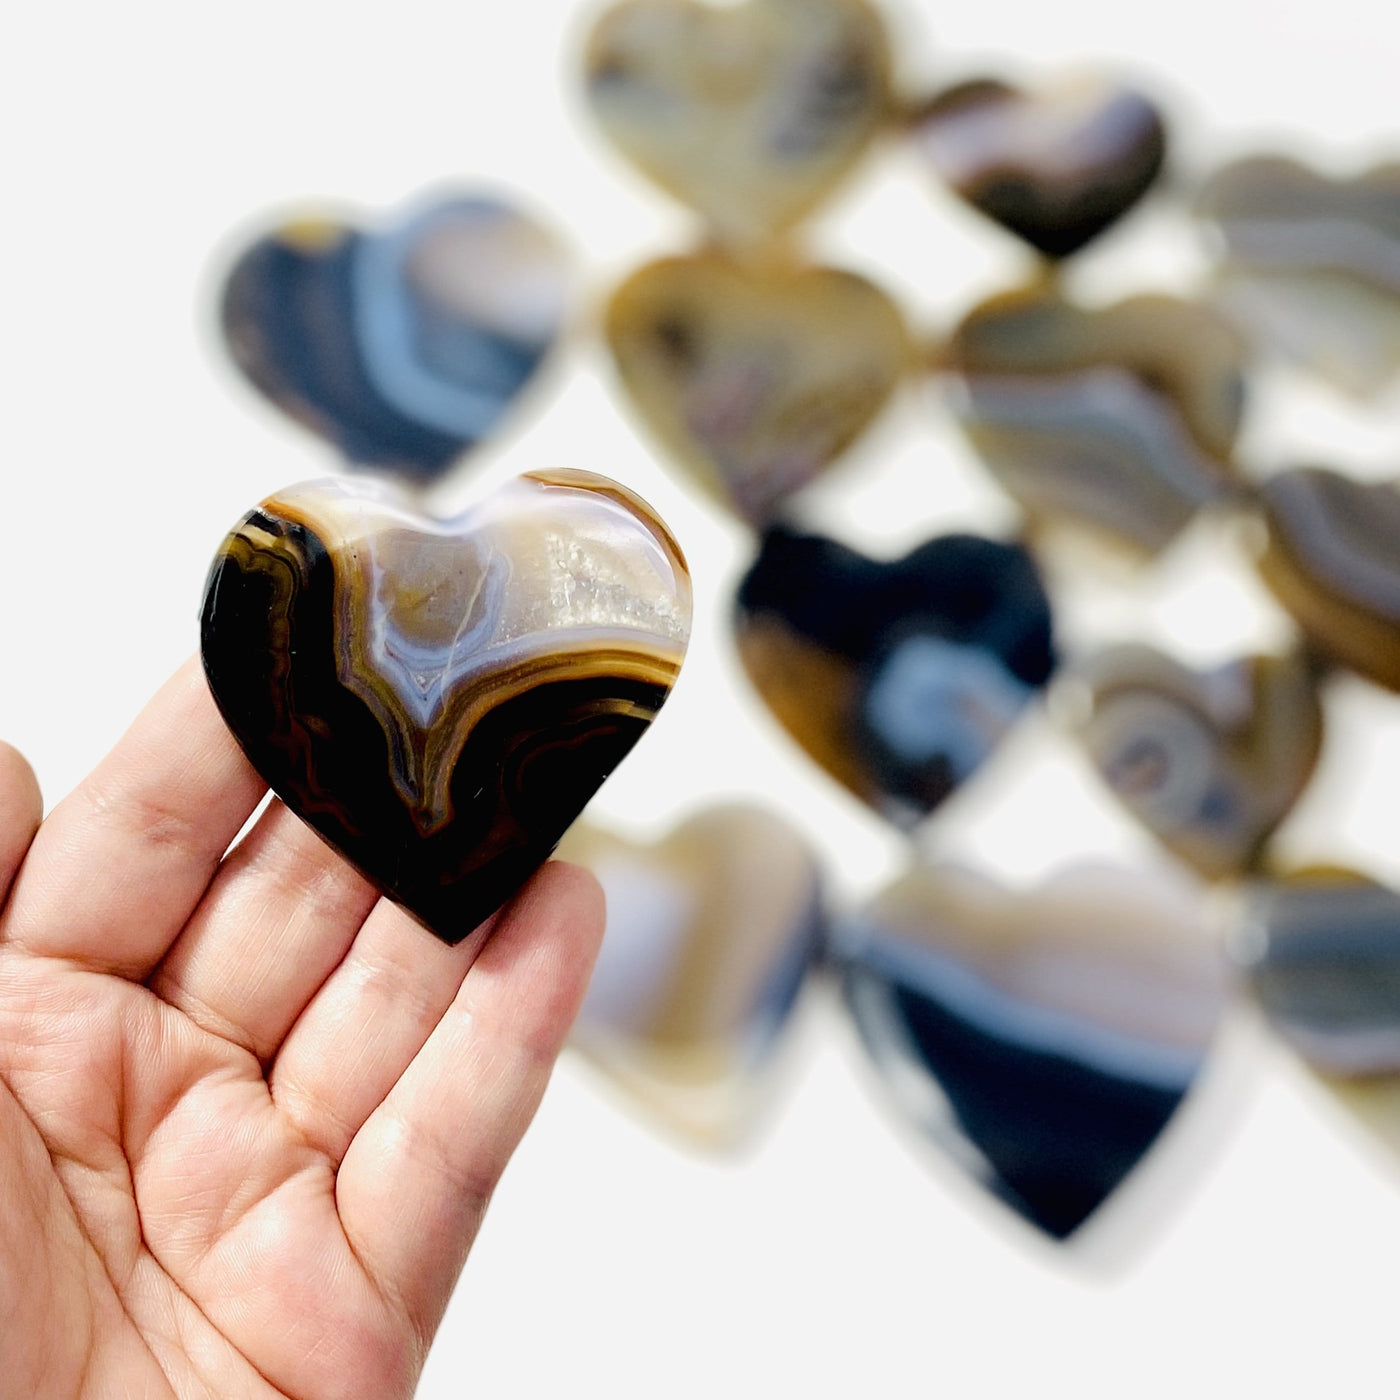 Agate Natural Heart Slice held in hand while others remain out of focus